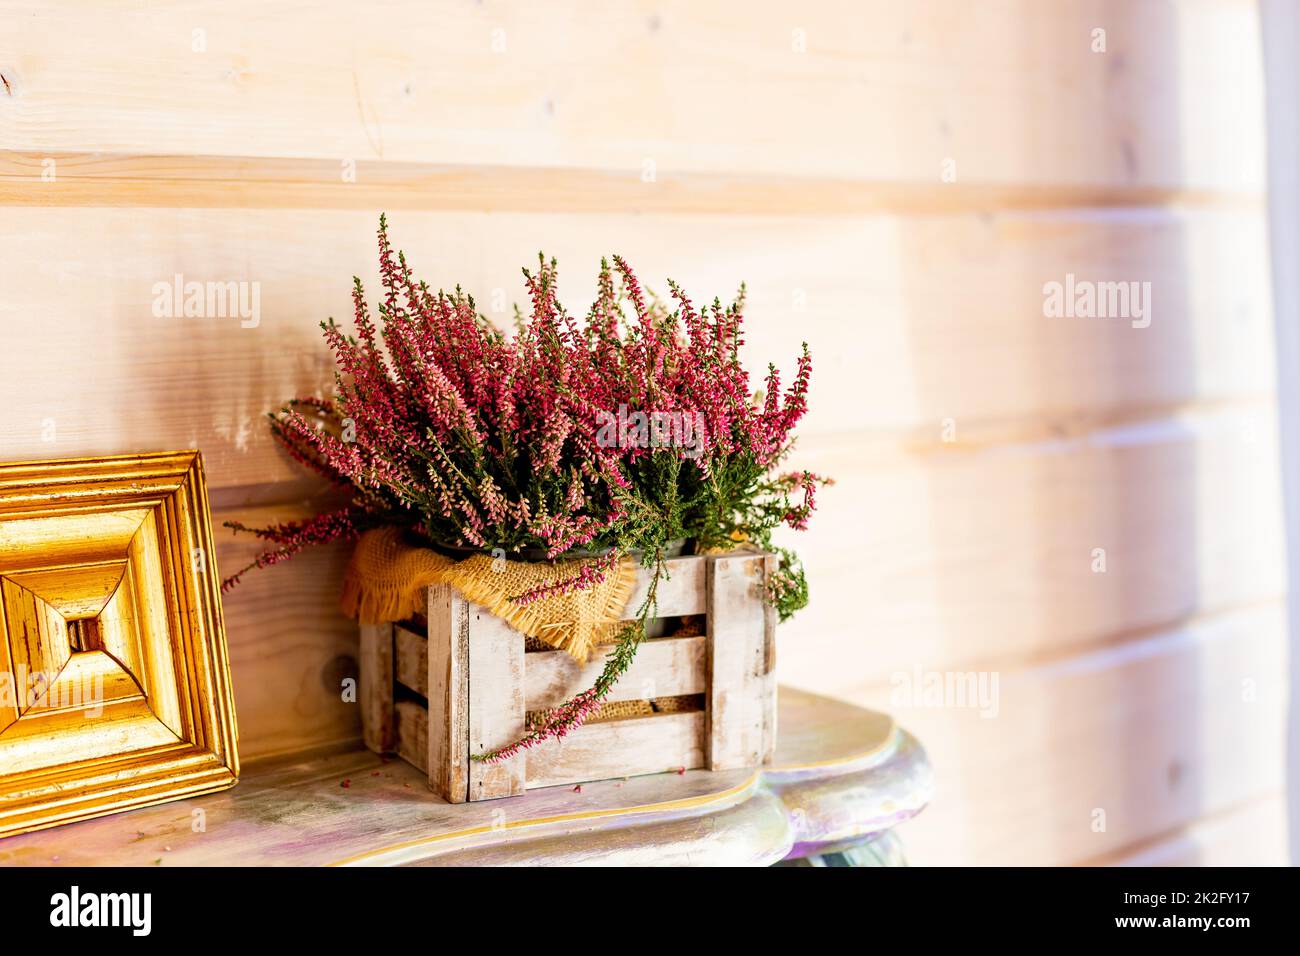 home balcony decor with pink heather flowers in wooden box, candlelight flame, autumn hygge home decor.Still life details of cozy interior in rustic Stock Photo